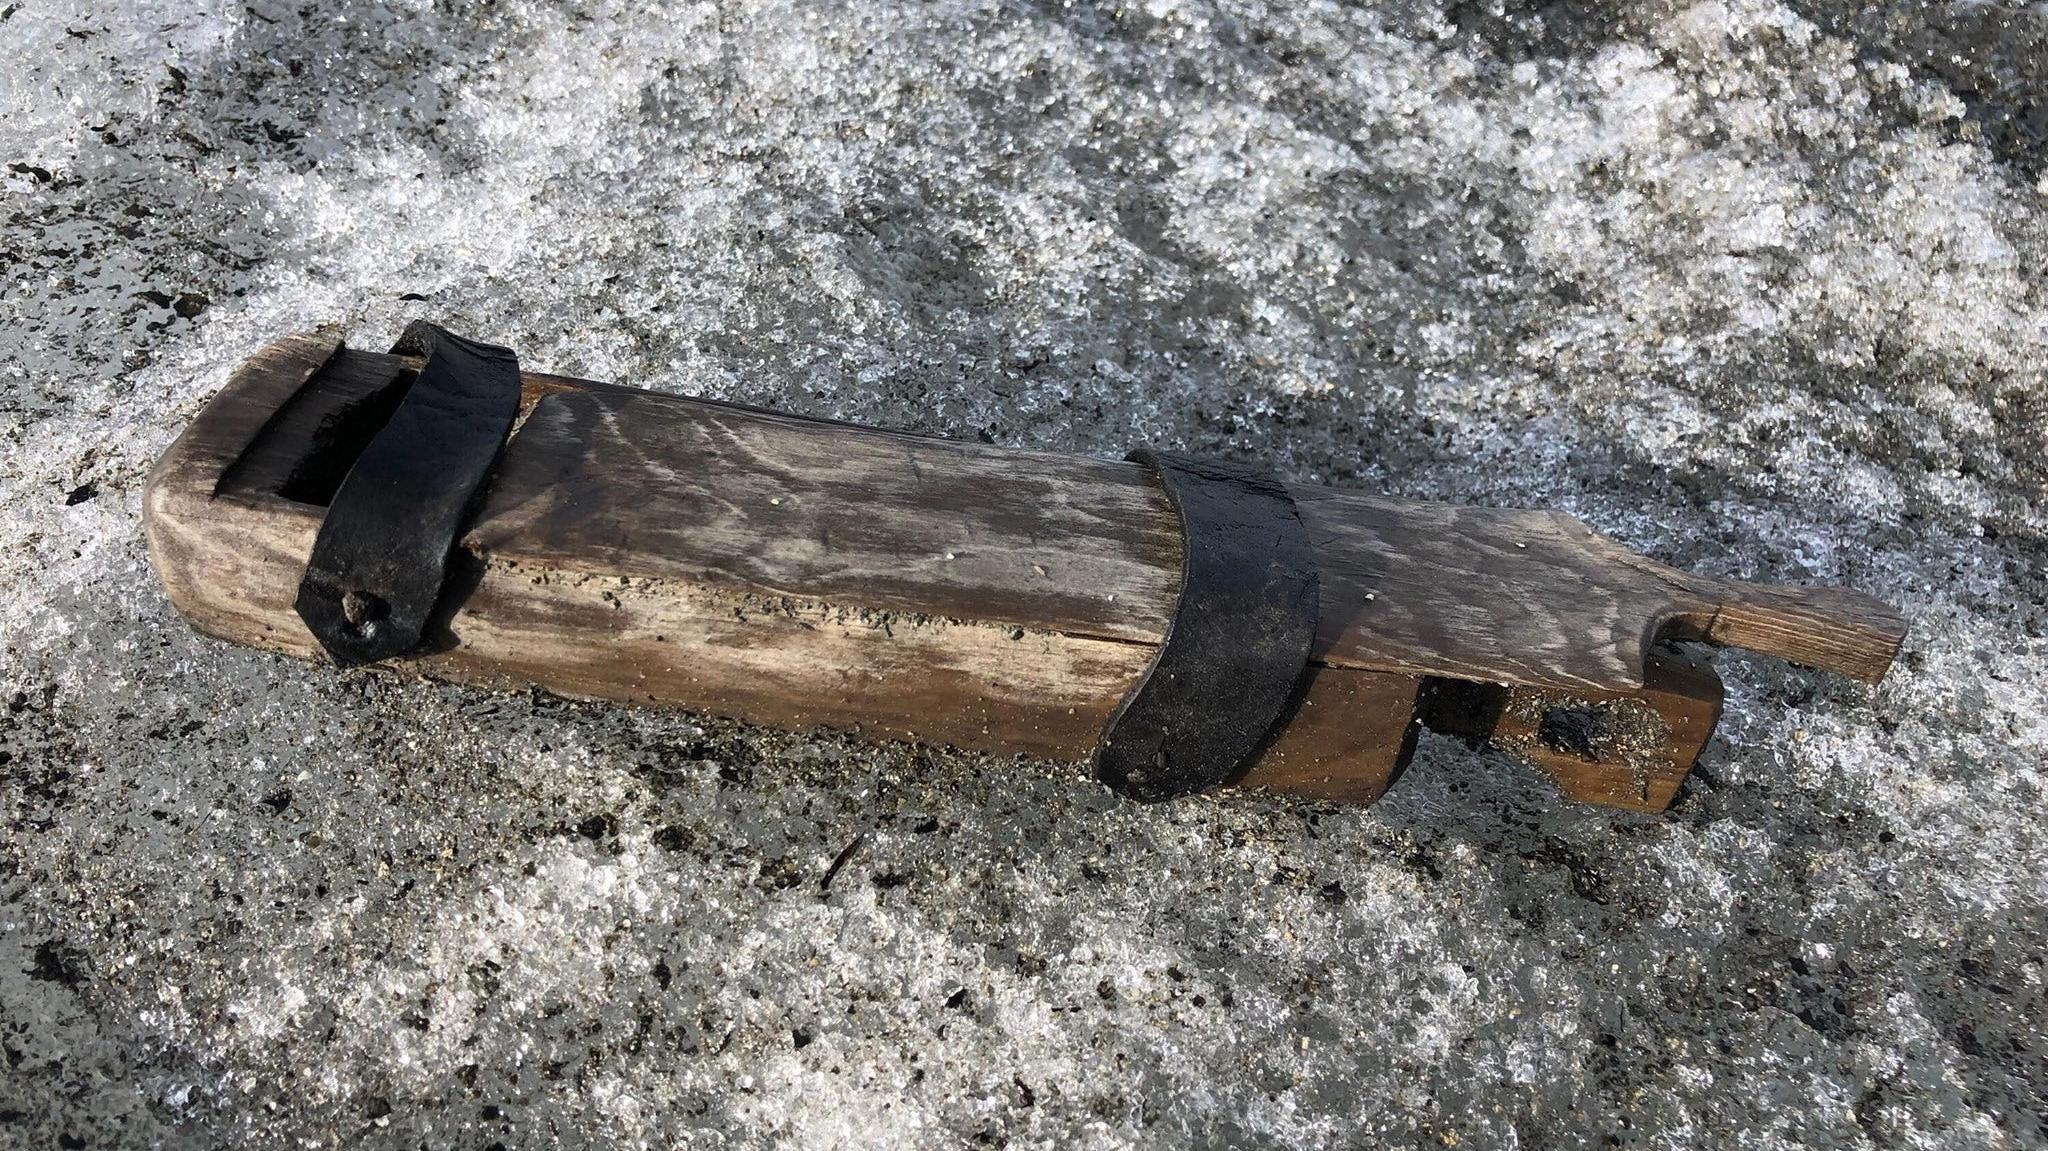 The wooden box, fresh out of the ice. (Photo: The Glacier Archaeology Program Innlandet)